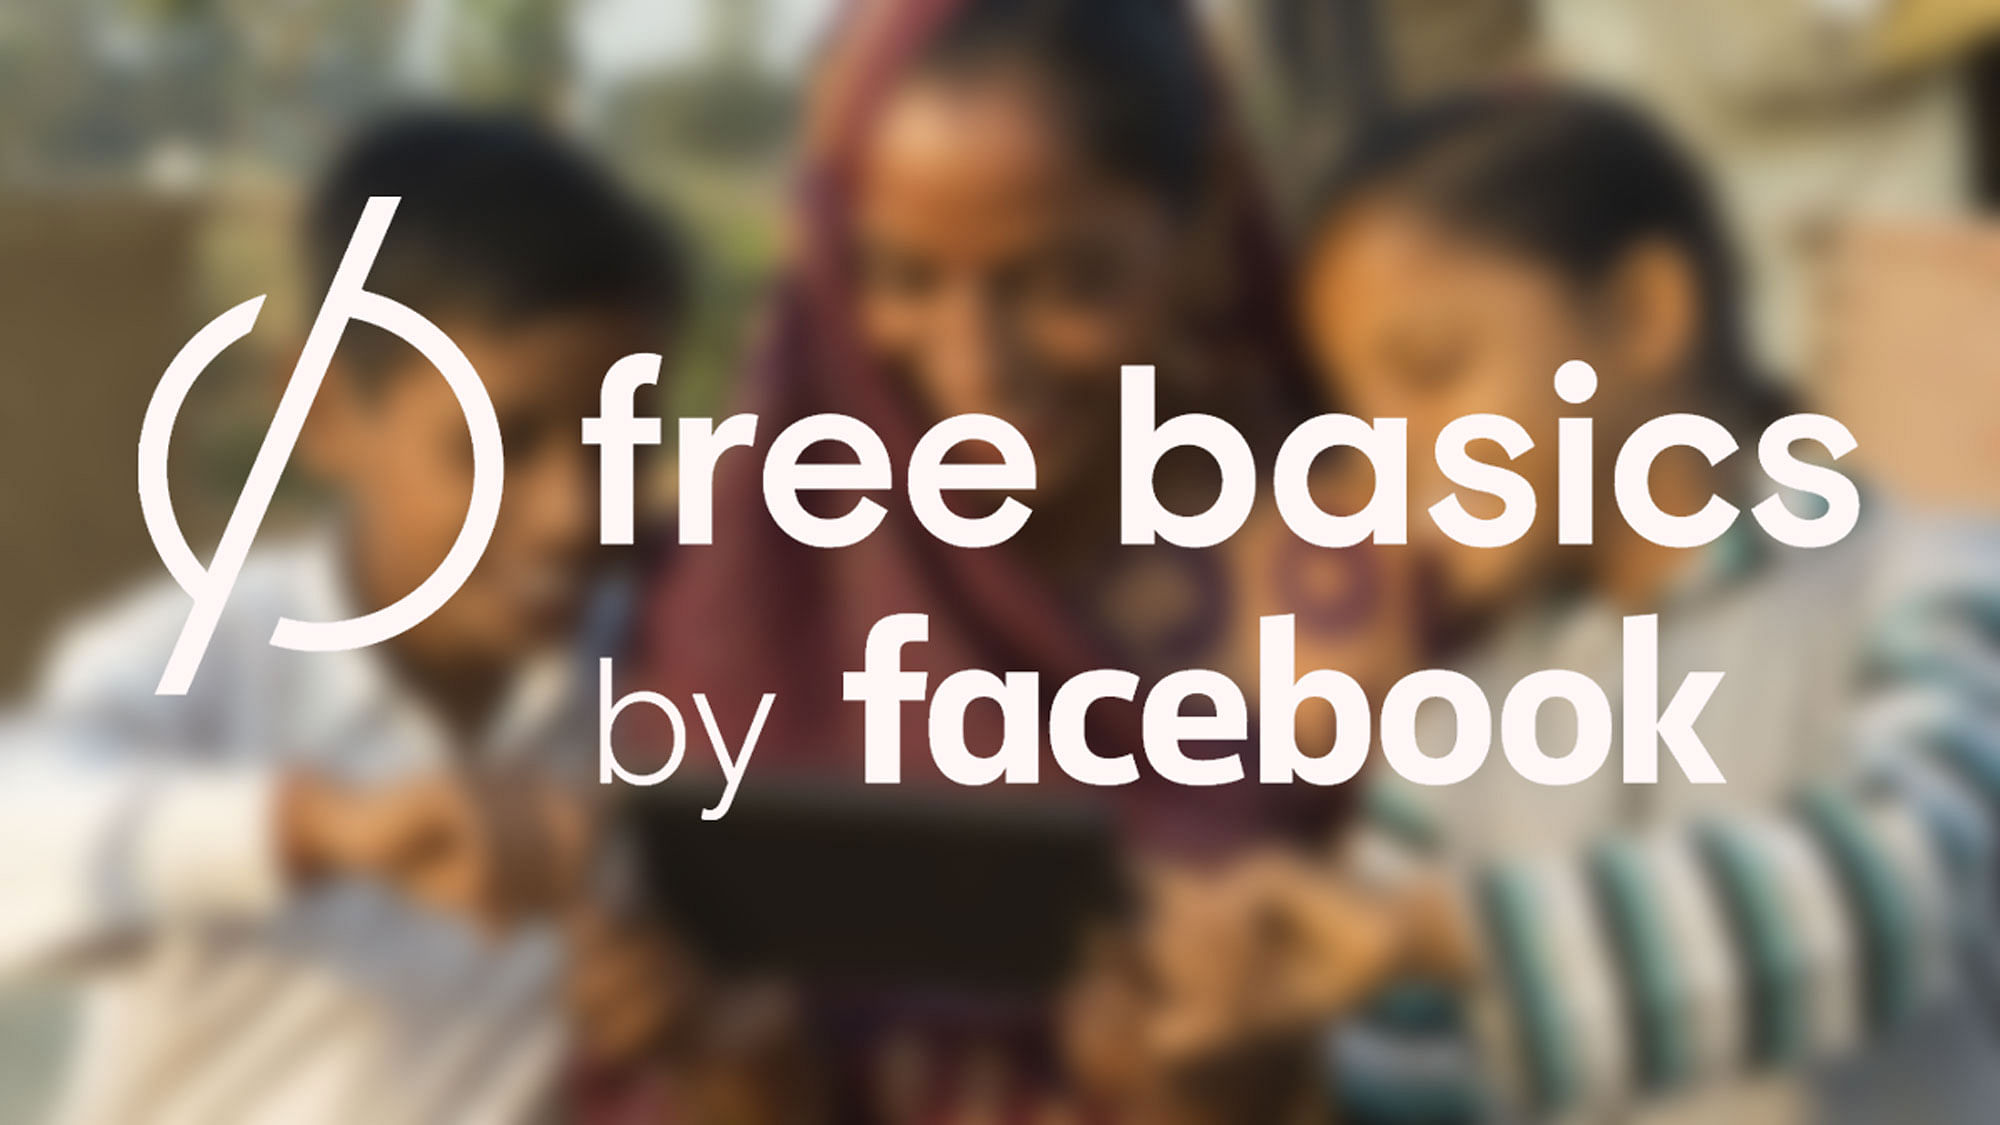 Noting in life is free, not even Facebook Free Basics. (Photo: <a href="https://www.facebook.com/internetdotorg.india/?fref=ts&amp;rf=842868432437258">Facebook</a>)